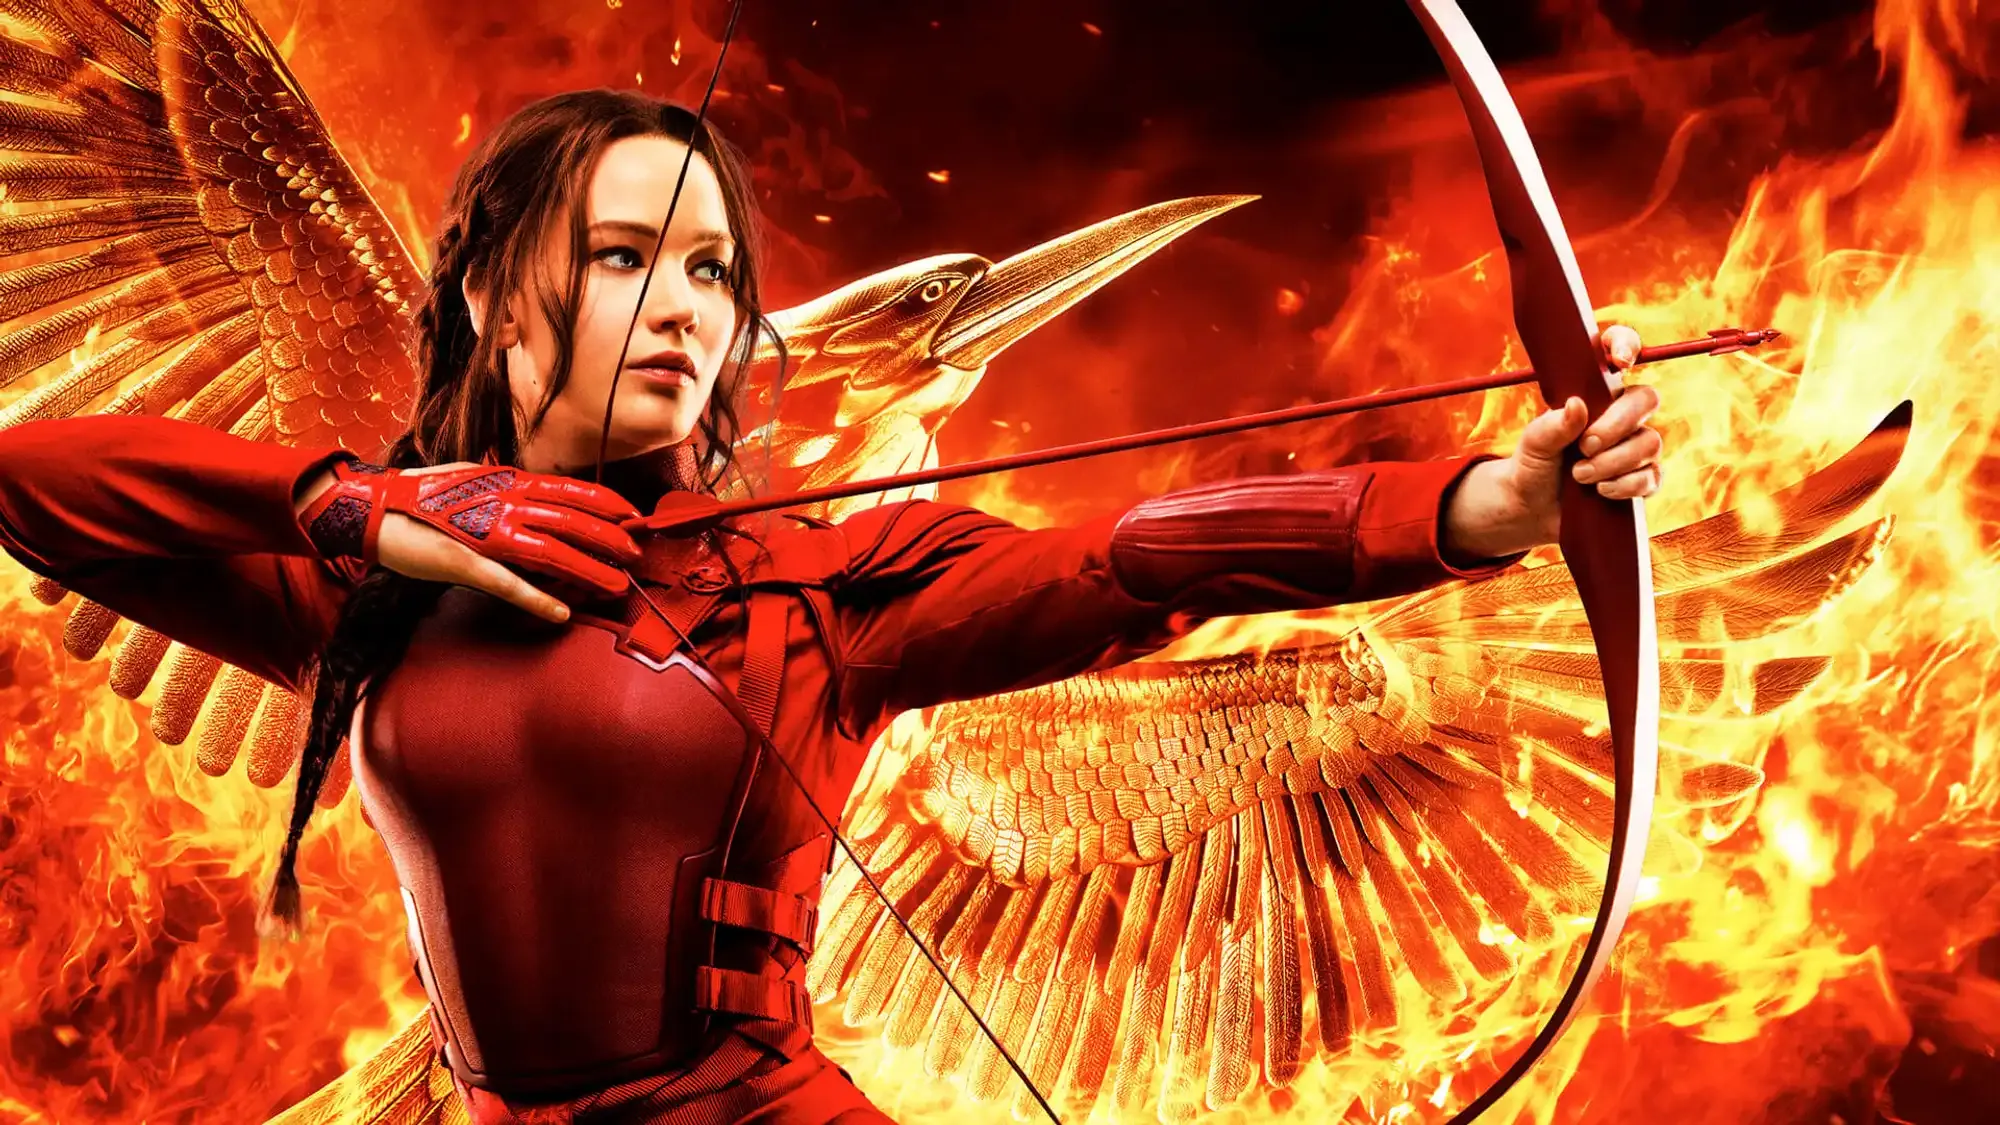 The Hunger Games: Mockingjay - Part 2 movie review